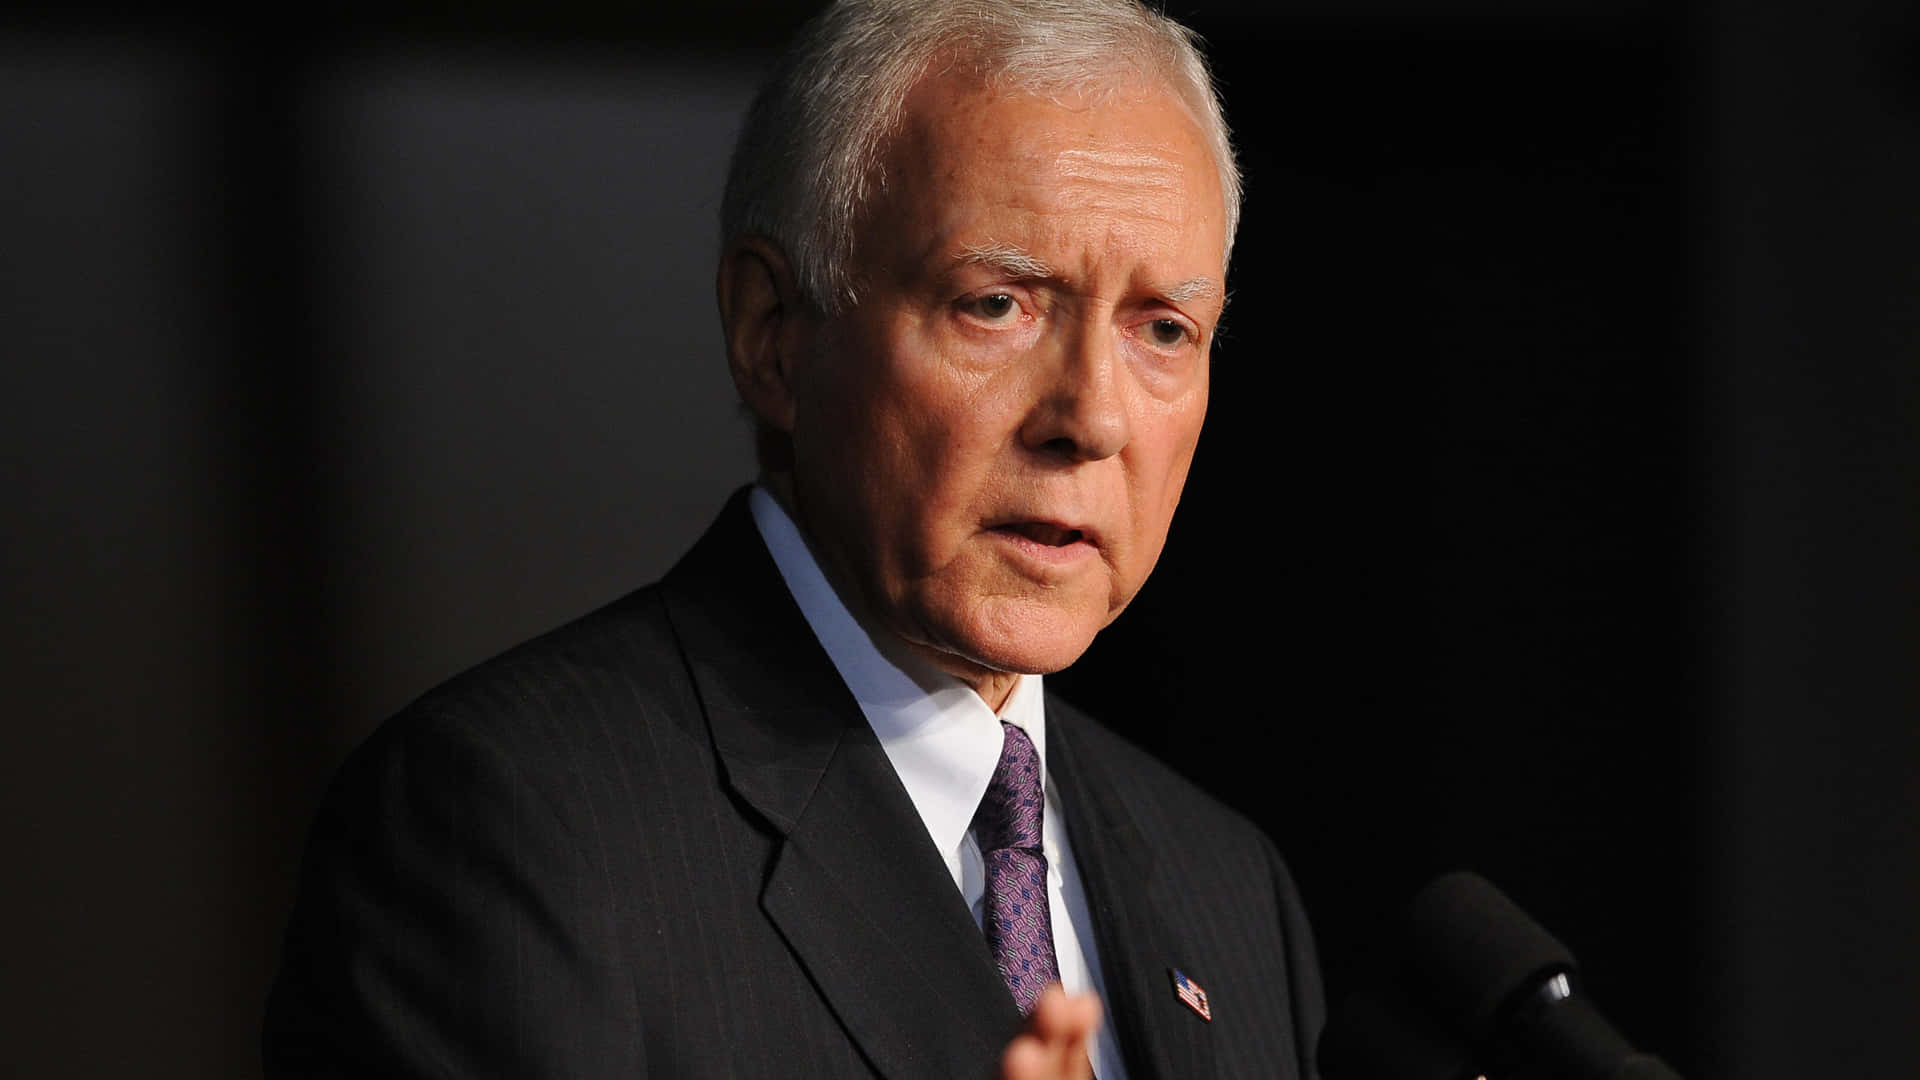 Profile Image Of Orrin Hatch In Thought Wallpaper